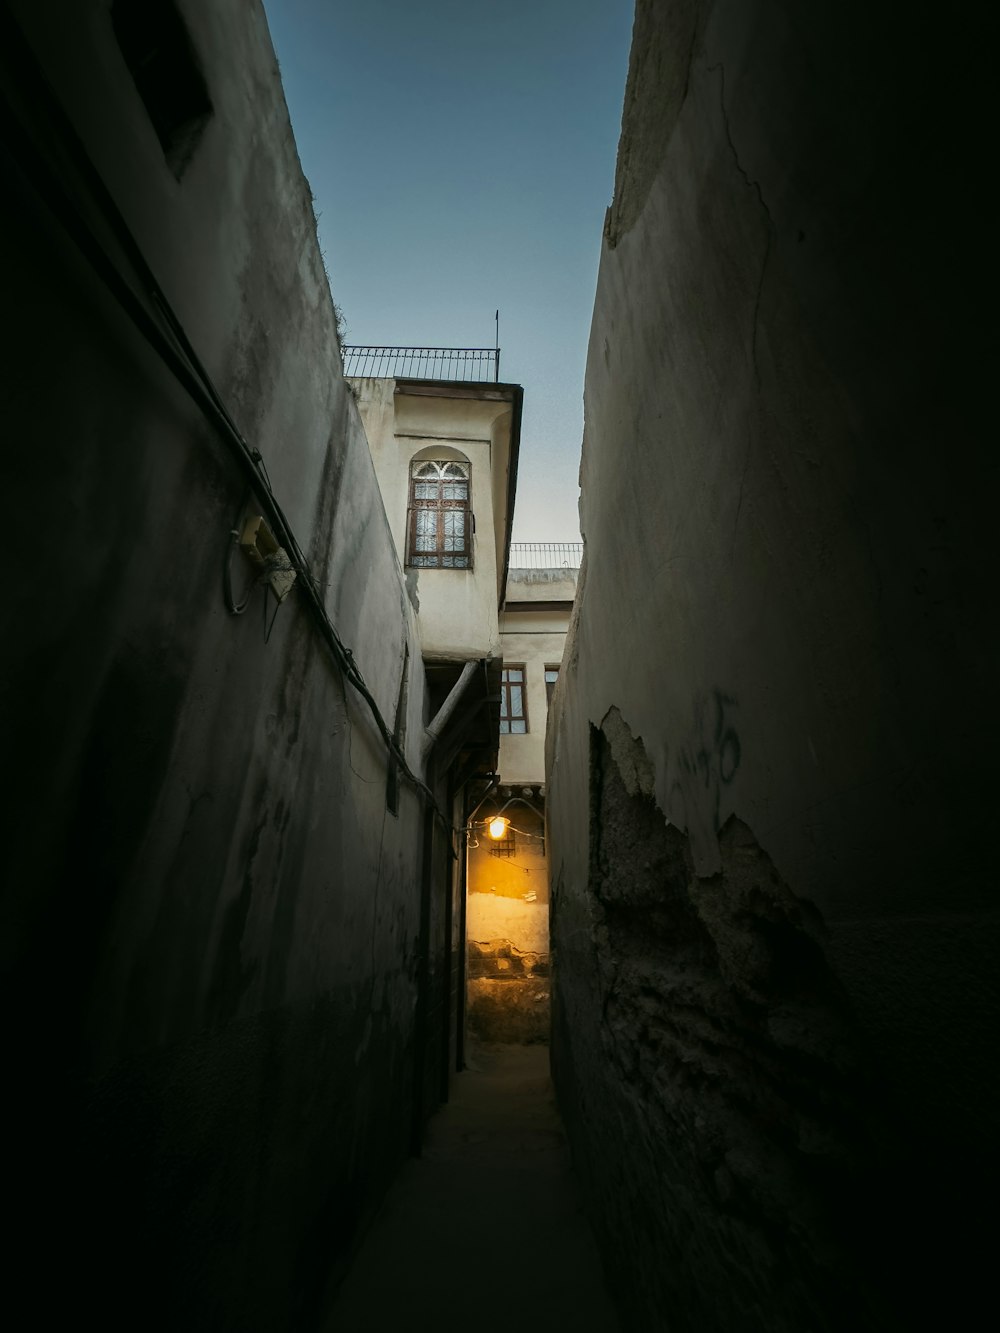 a narrow alley way with a building in the background